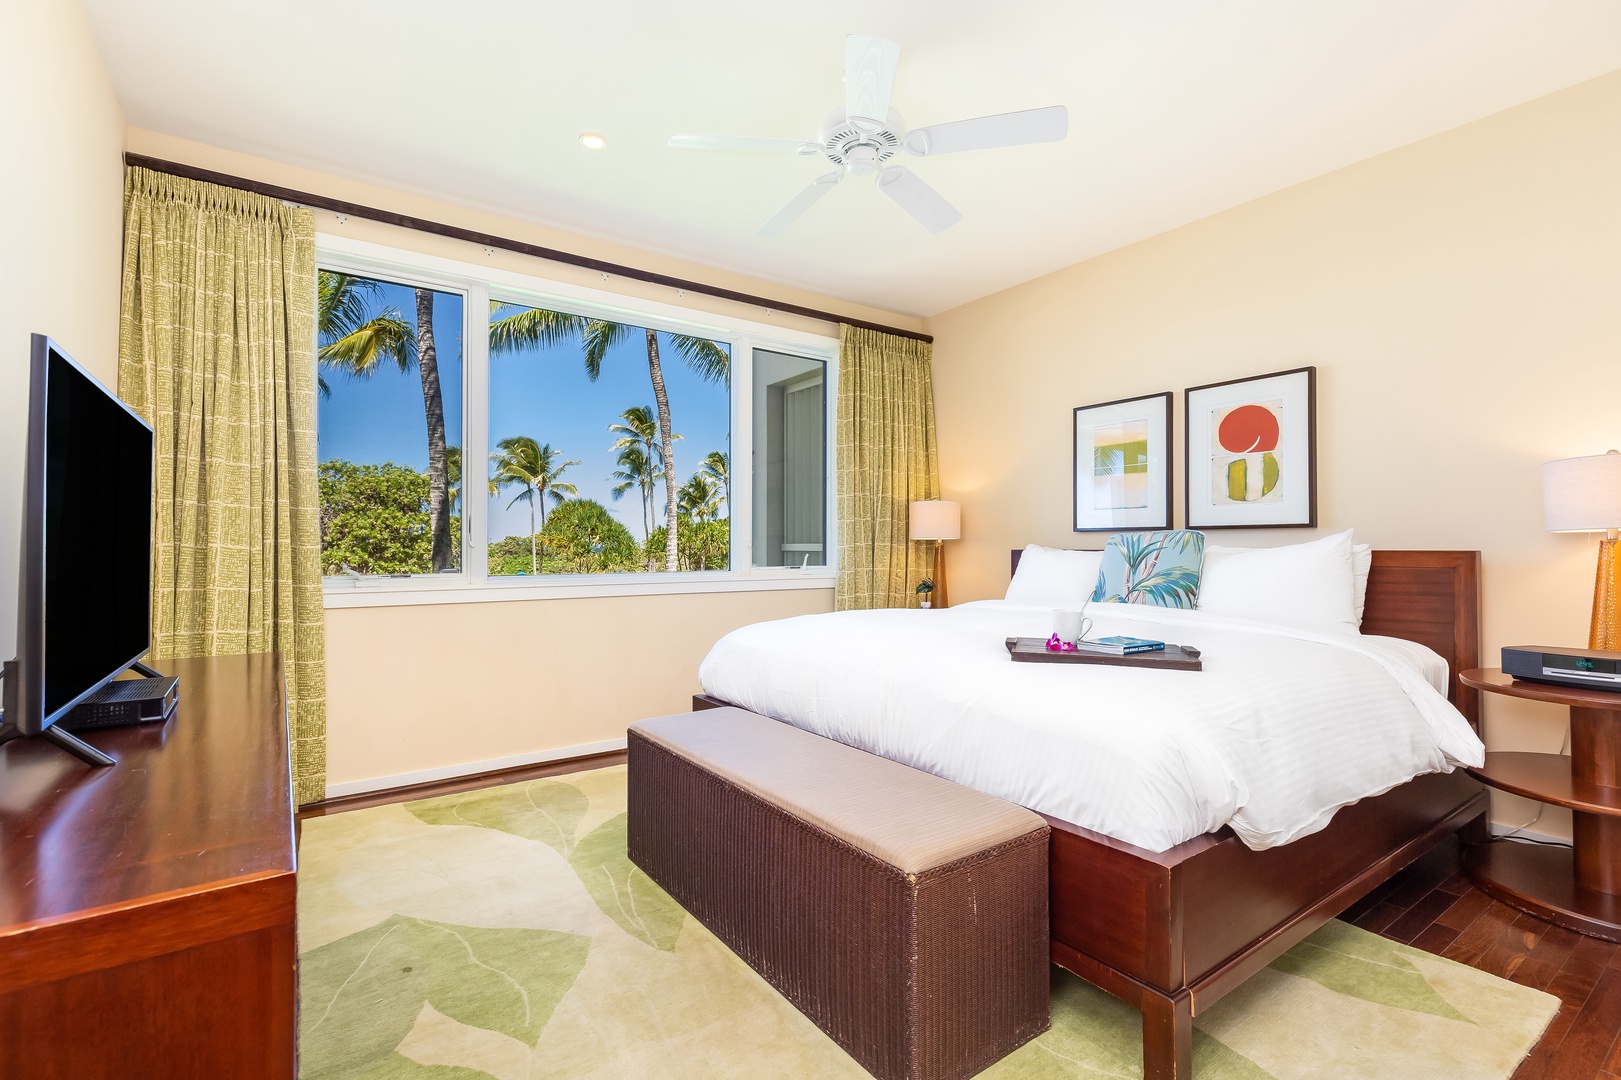 Kahuku Vacation Rentals, Turtle Bay Villas 201 - Guest bedroom with a King-size bed